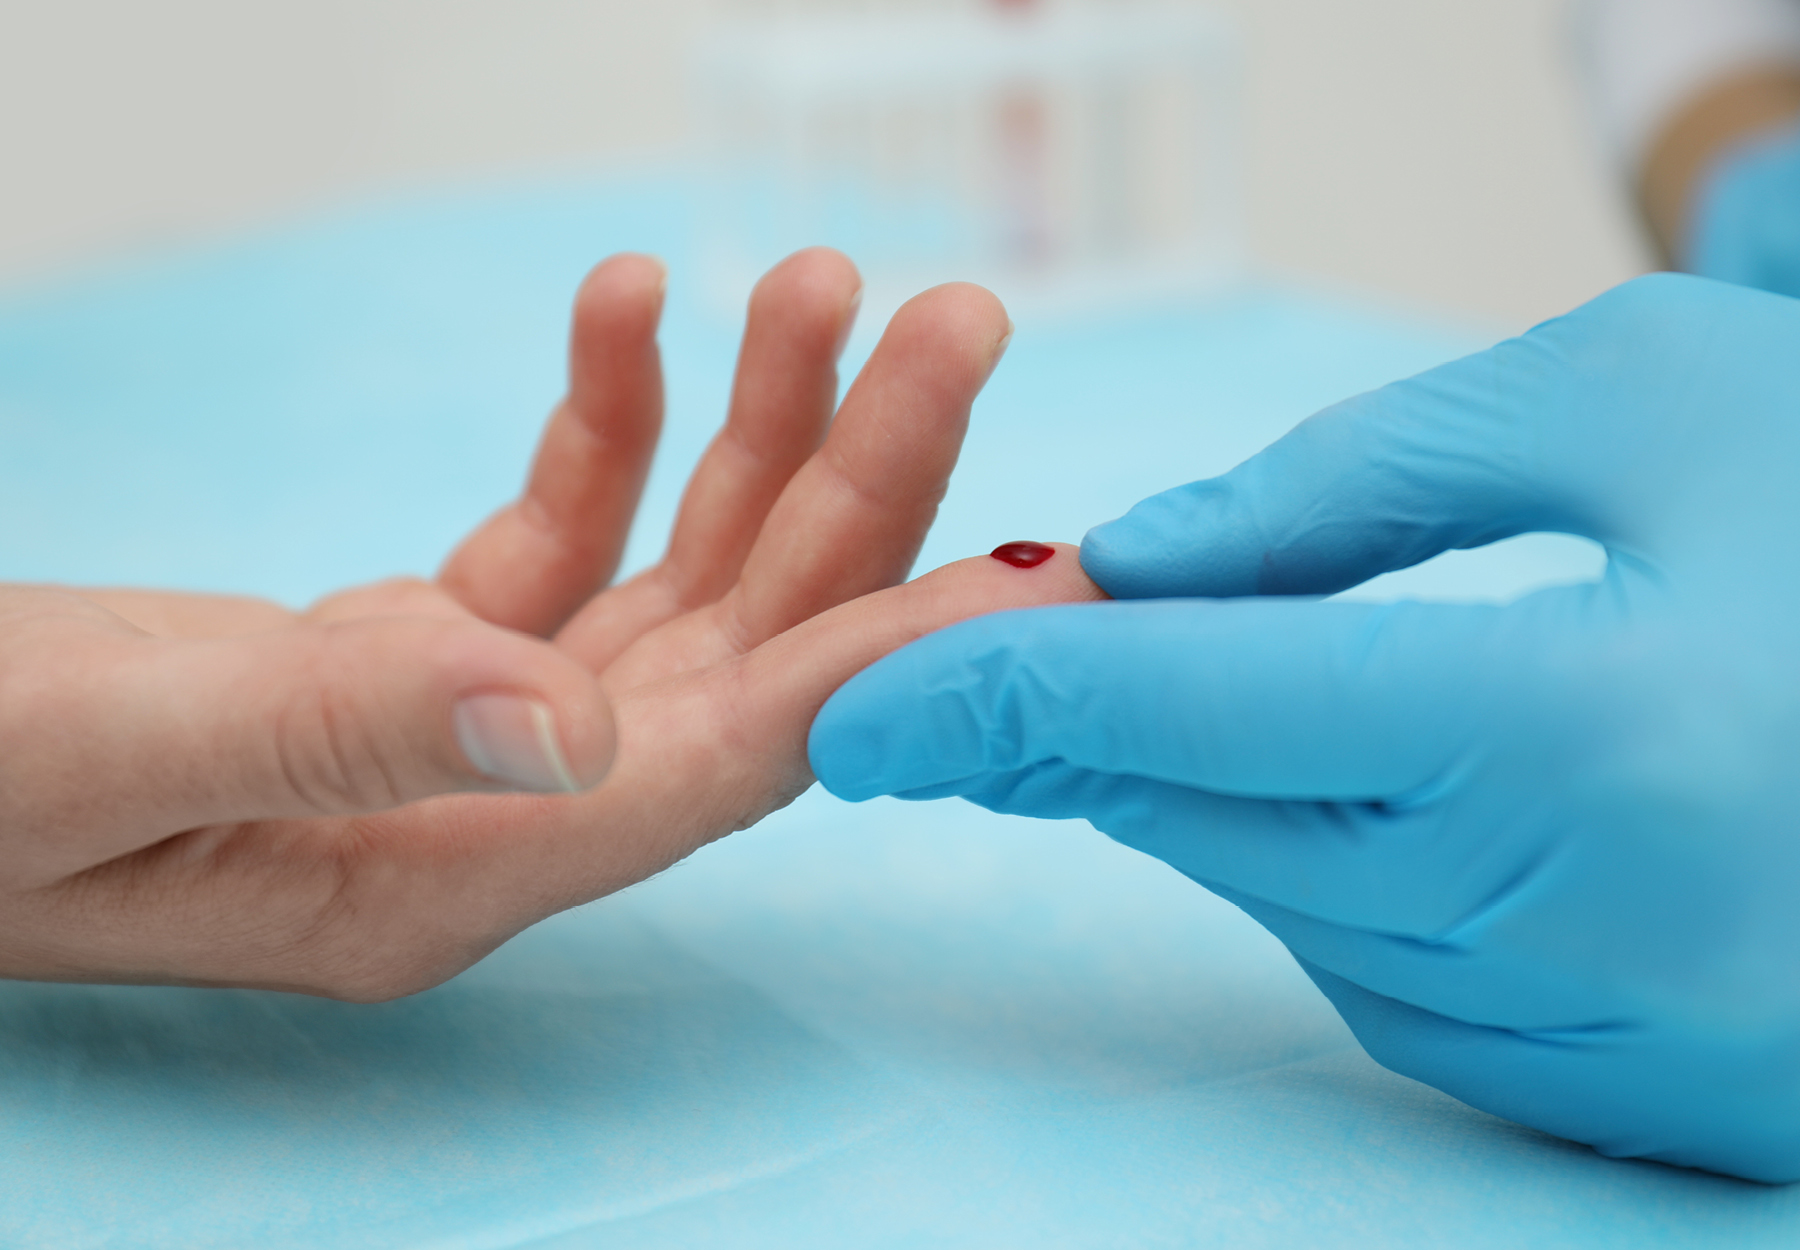 A doctor or nurse's blue-gloved hand holds a patient's hand that has just had a fingerstick test done. There is a drop of blood on the patient's index finger.